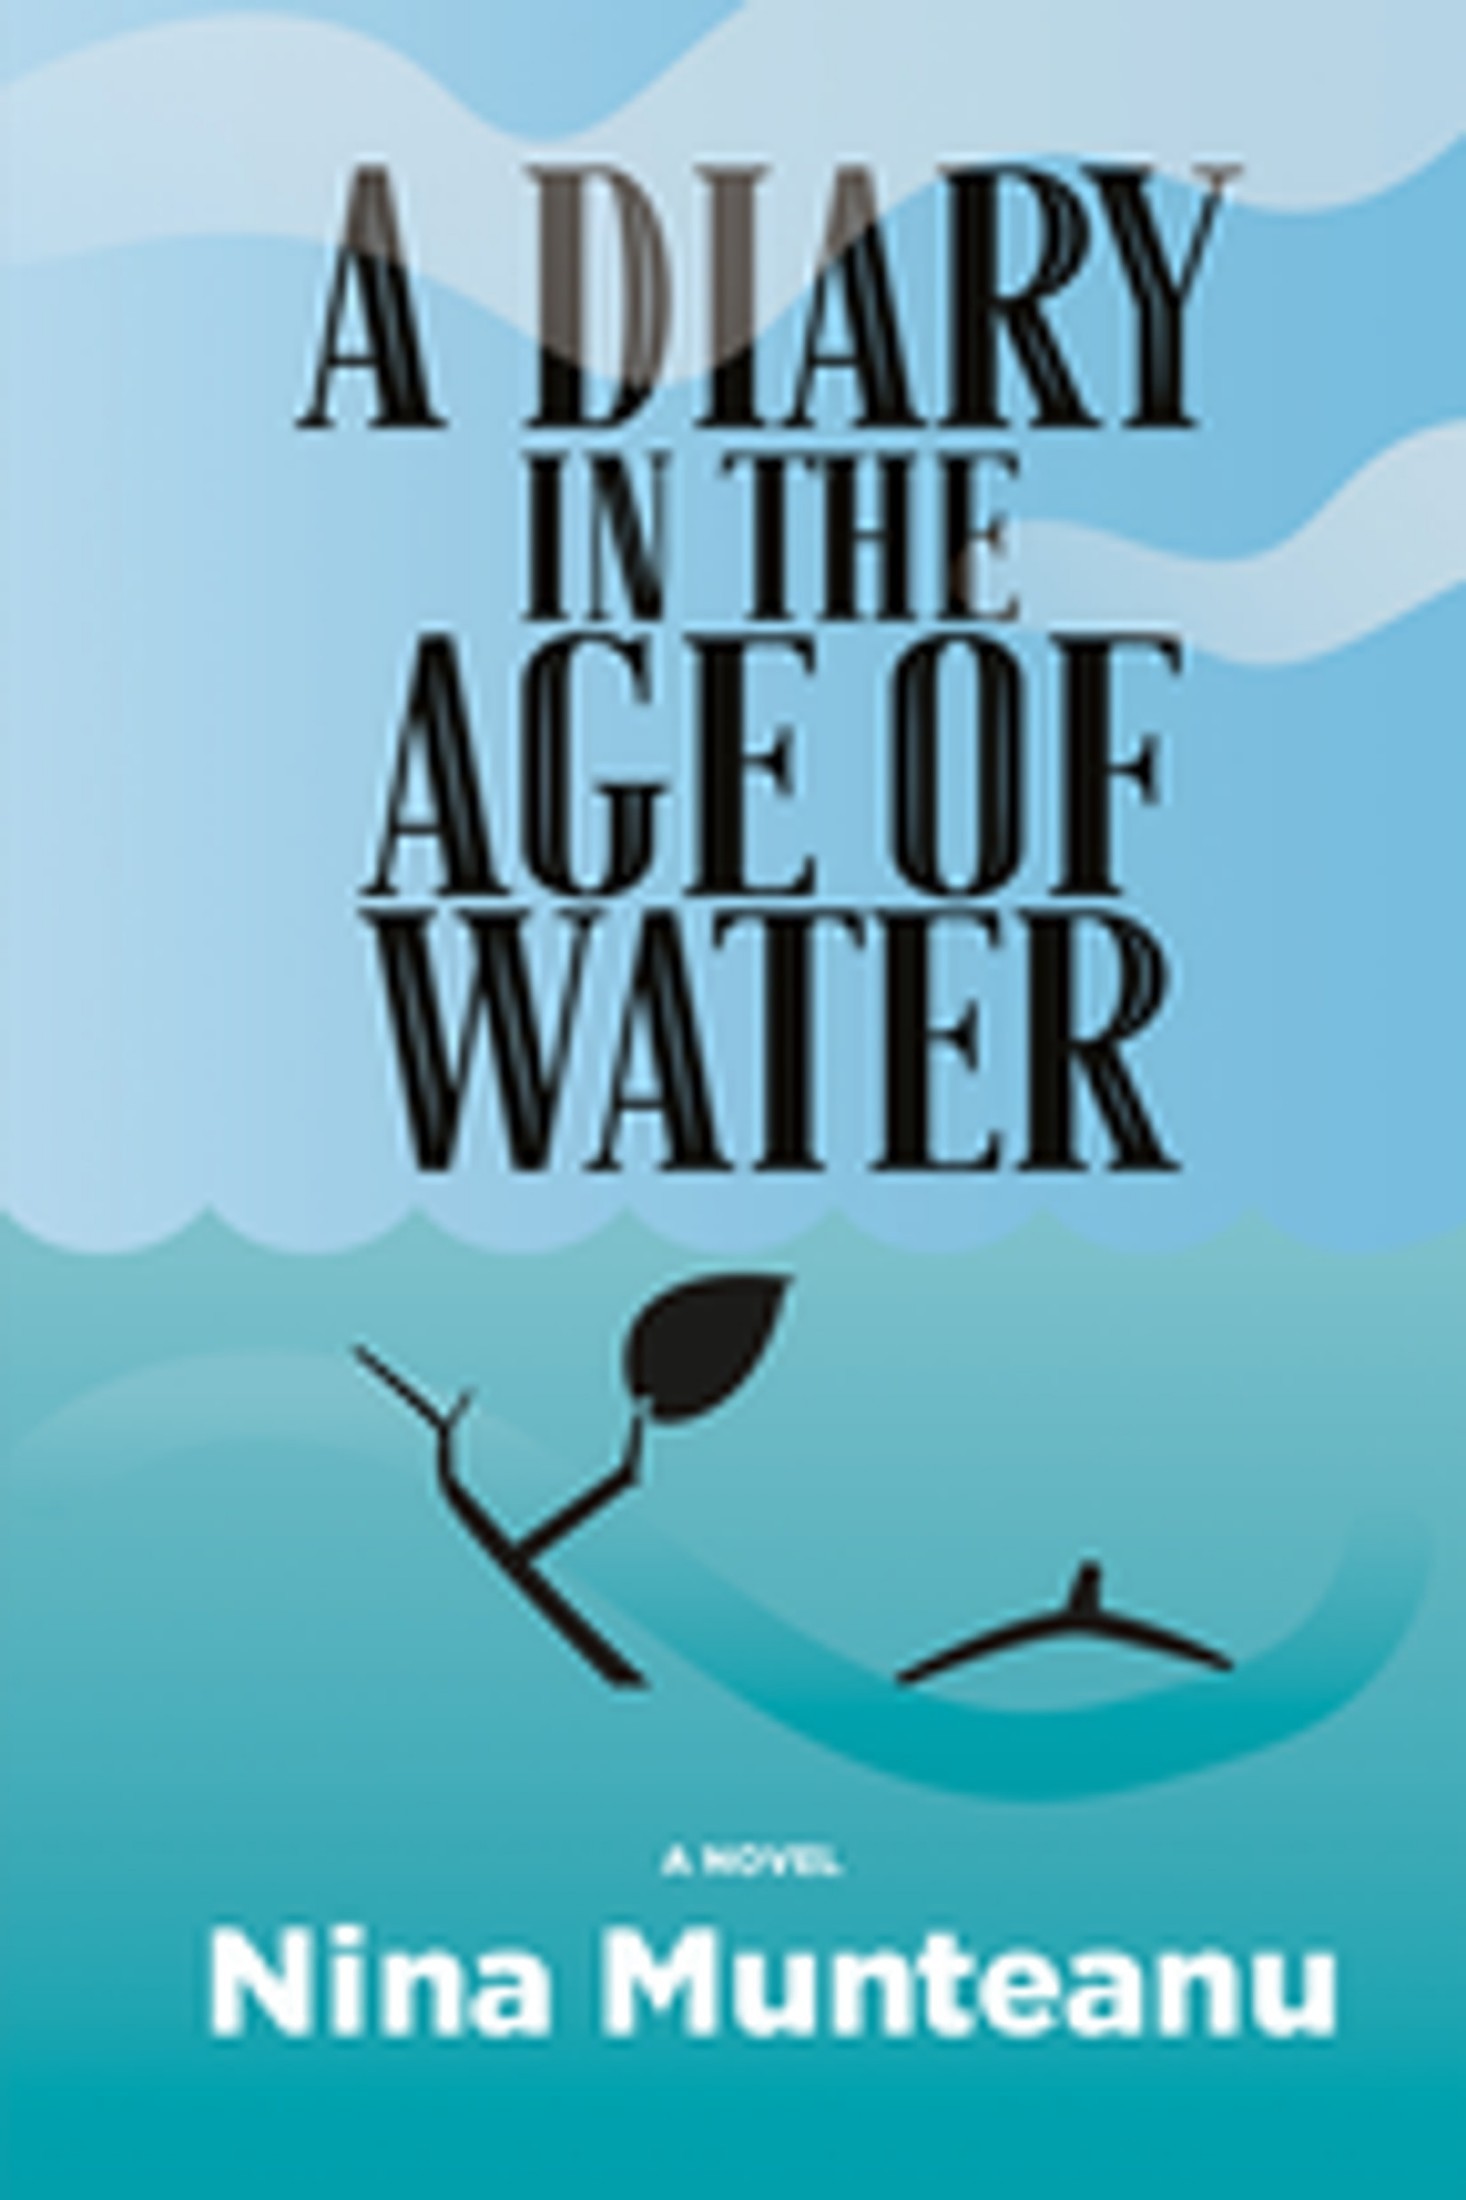 Nina Munteanu: A Diary in the Age of Water (2020, Inanna Publications & Education, Incorporated)